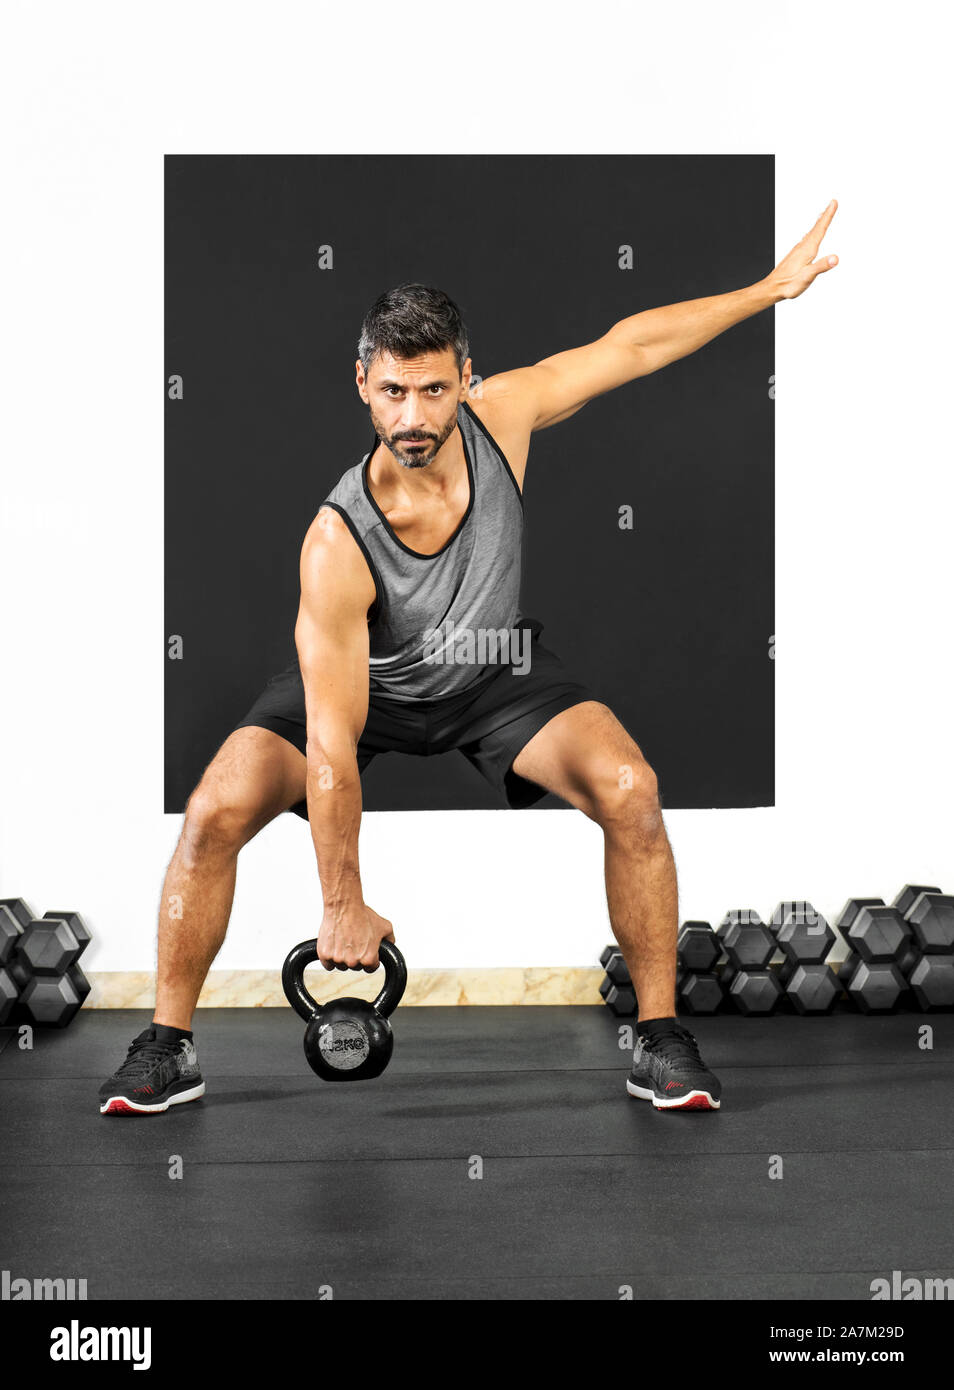 Man doing exercises with a kettlebell weight in a gym lifting it in the squat position to strengthen his gluteus muscles and legs in a health and fitn Stock Photo